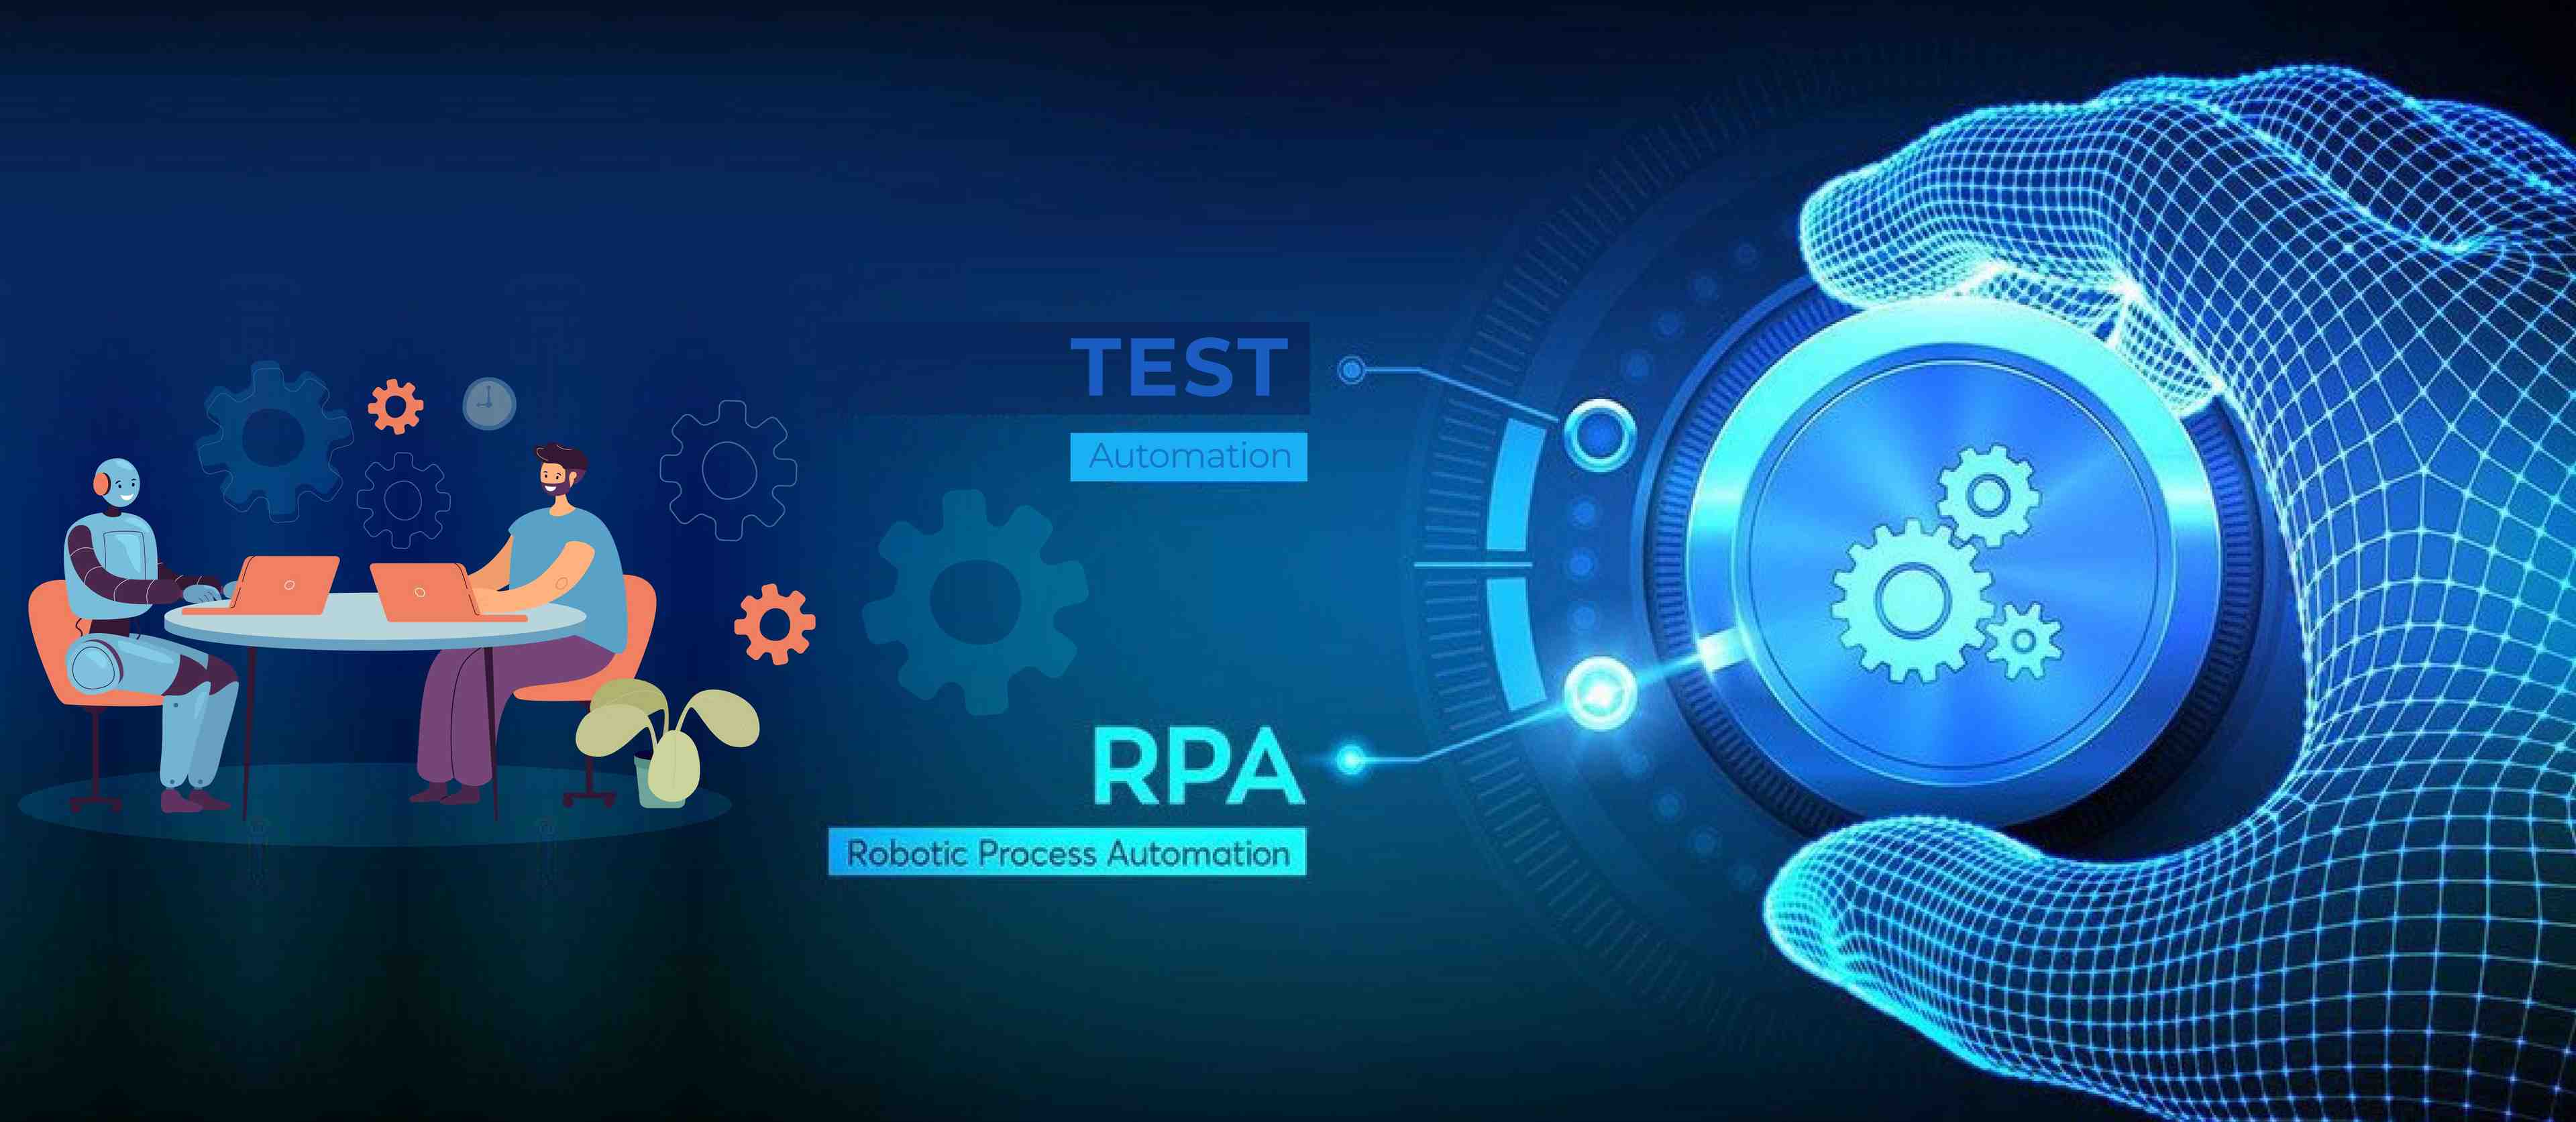 RPA vs Test Automation: What’s the difference?